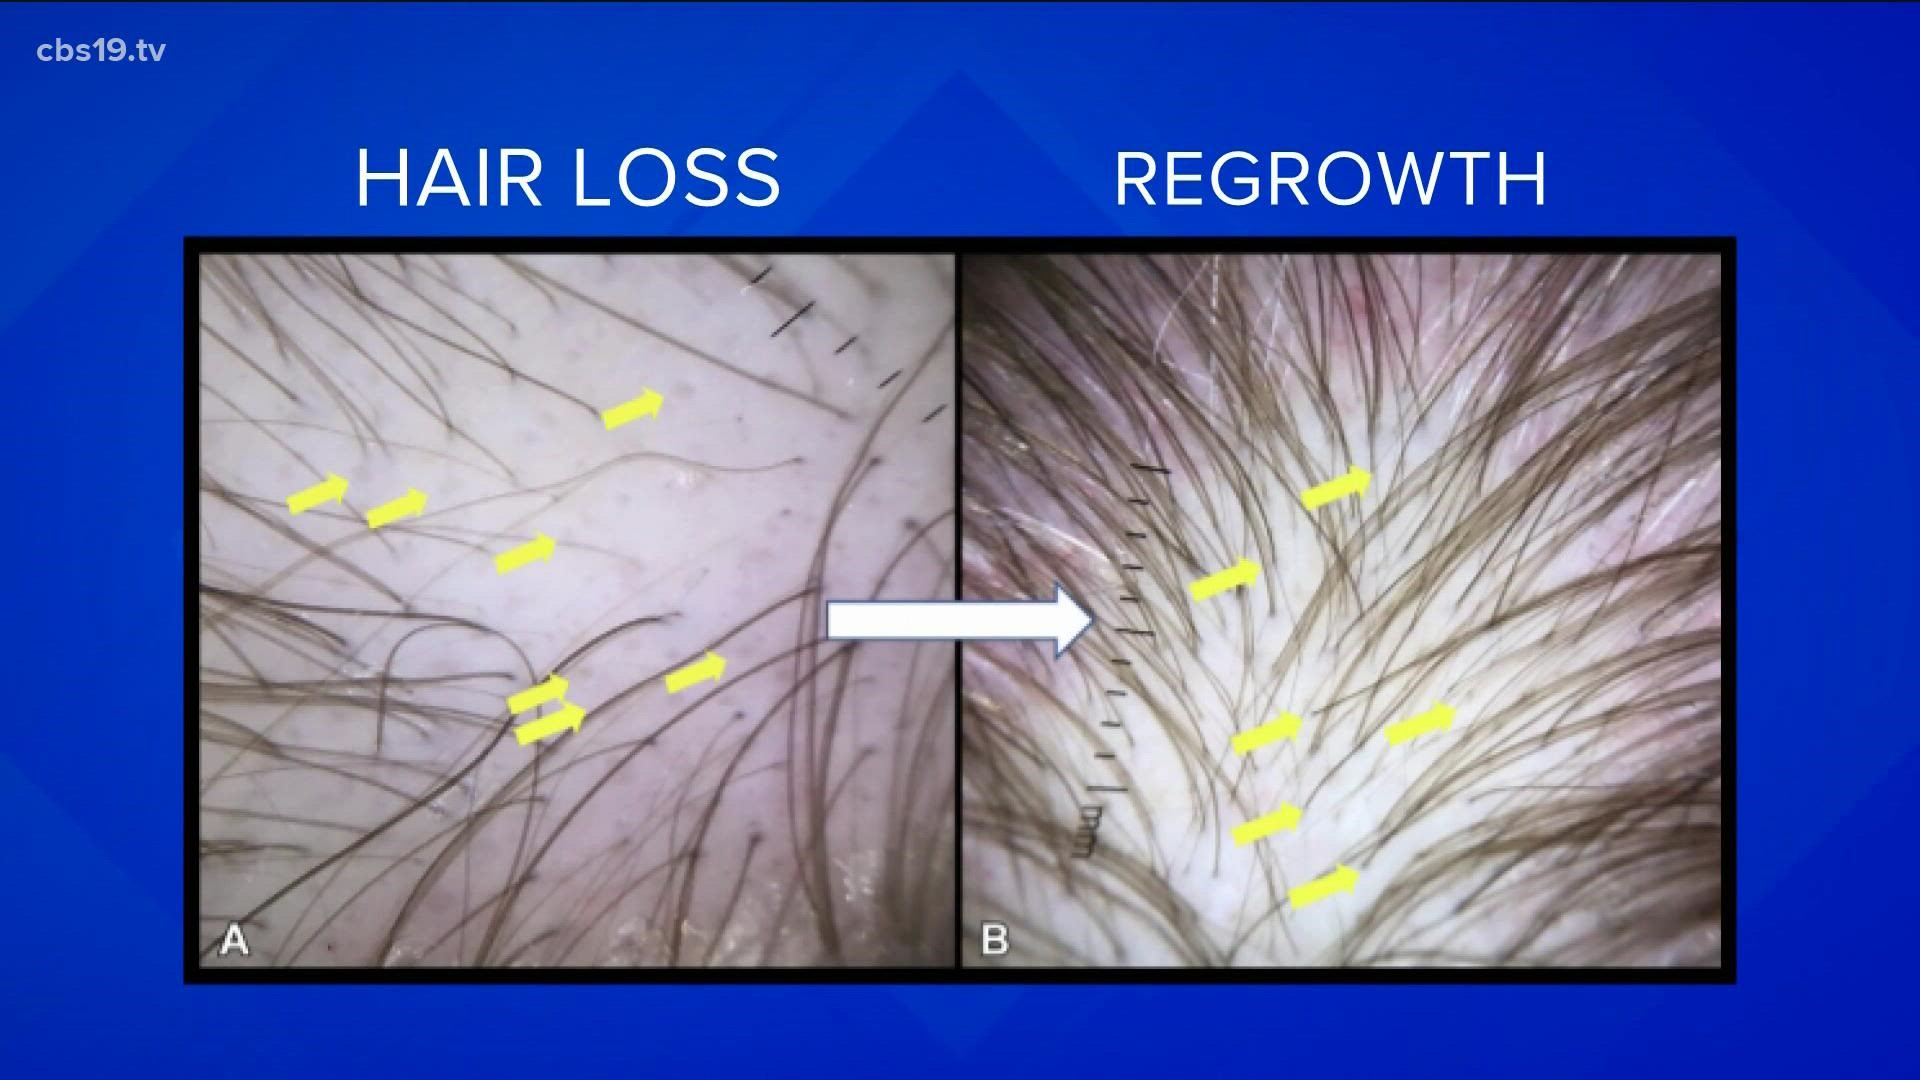 Telogen Effluvium is a condition that causes hair loss after a stressful experience.